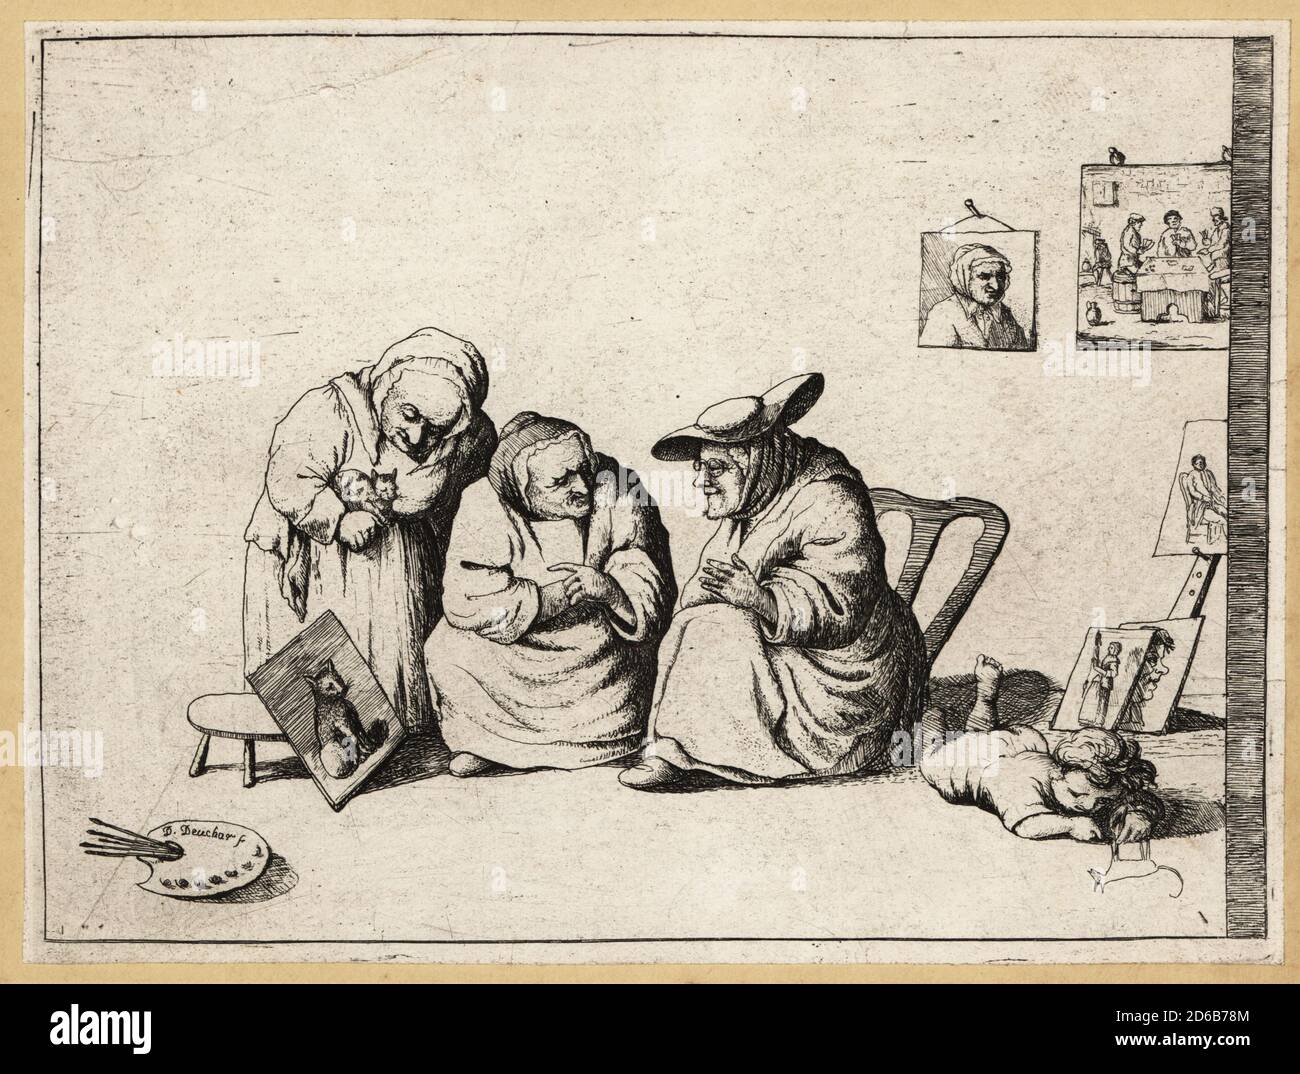 Connoisseurs of painting, 17th century. Three old women in caps look at a painting of a cat. With a palette and brushes, paintings on the wall and on an easel, and a child drawing on the floor. Copperplate engraving by David Deuchar after an original by from A Collection of Etchings after the most Eminent Masters of the Dutch and Flemish Schools, Edinburgh, 1803. Stock Photo